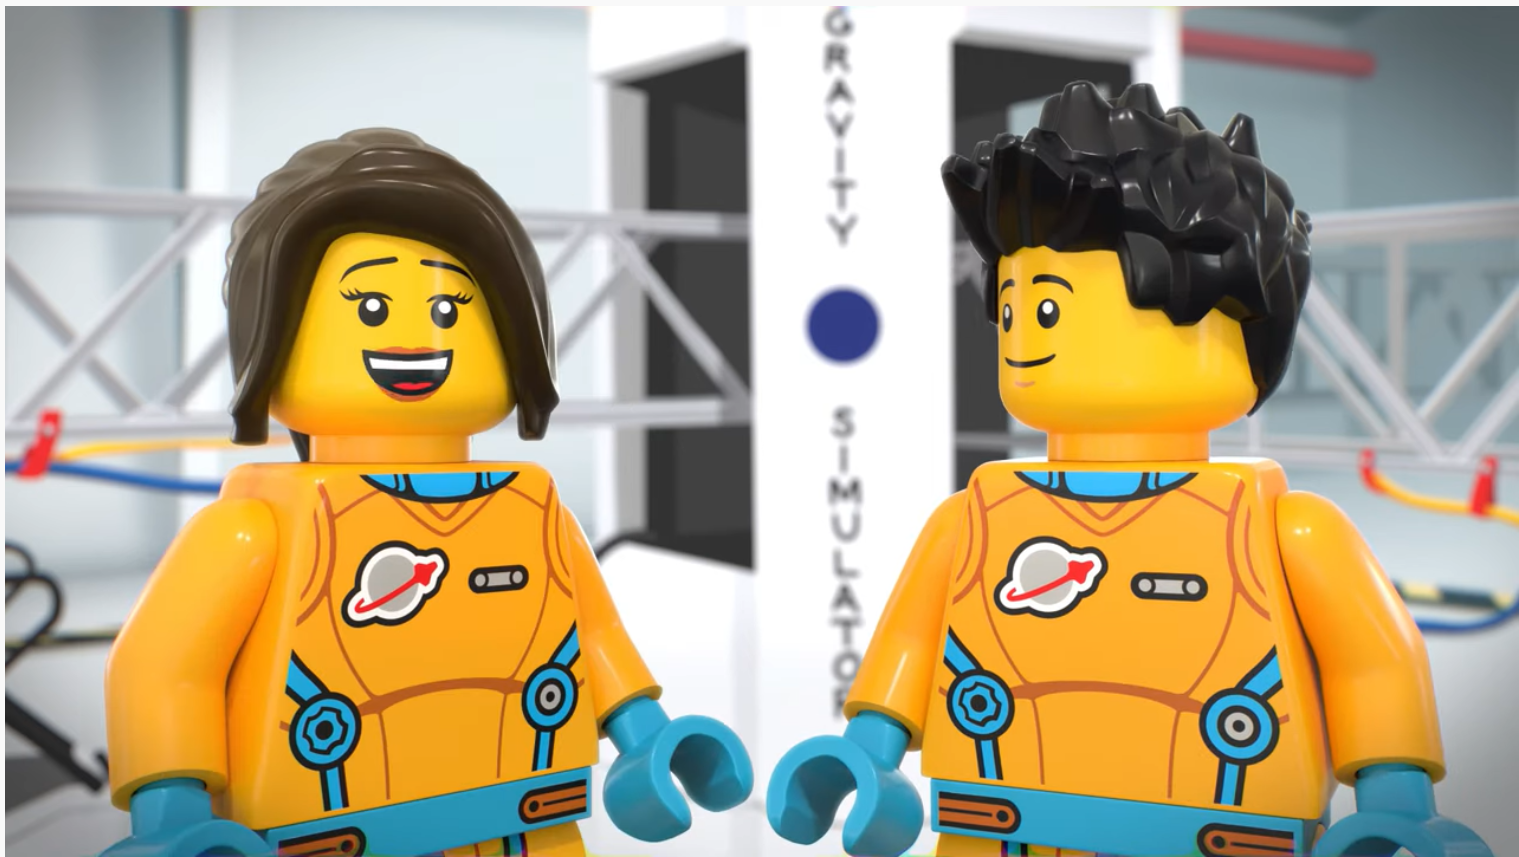 Lego minifigures Kate and Kyle in spacesuits.